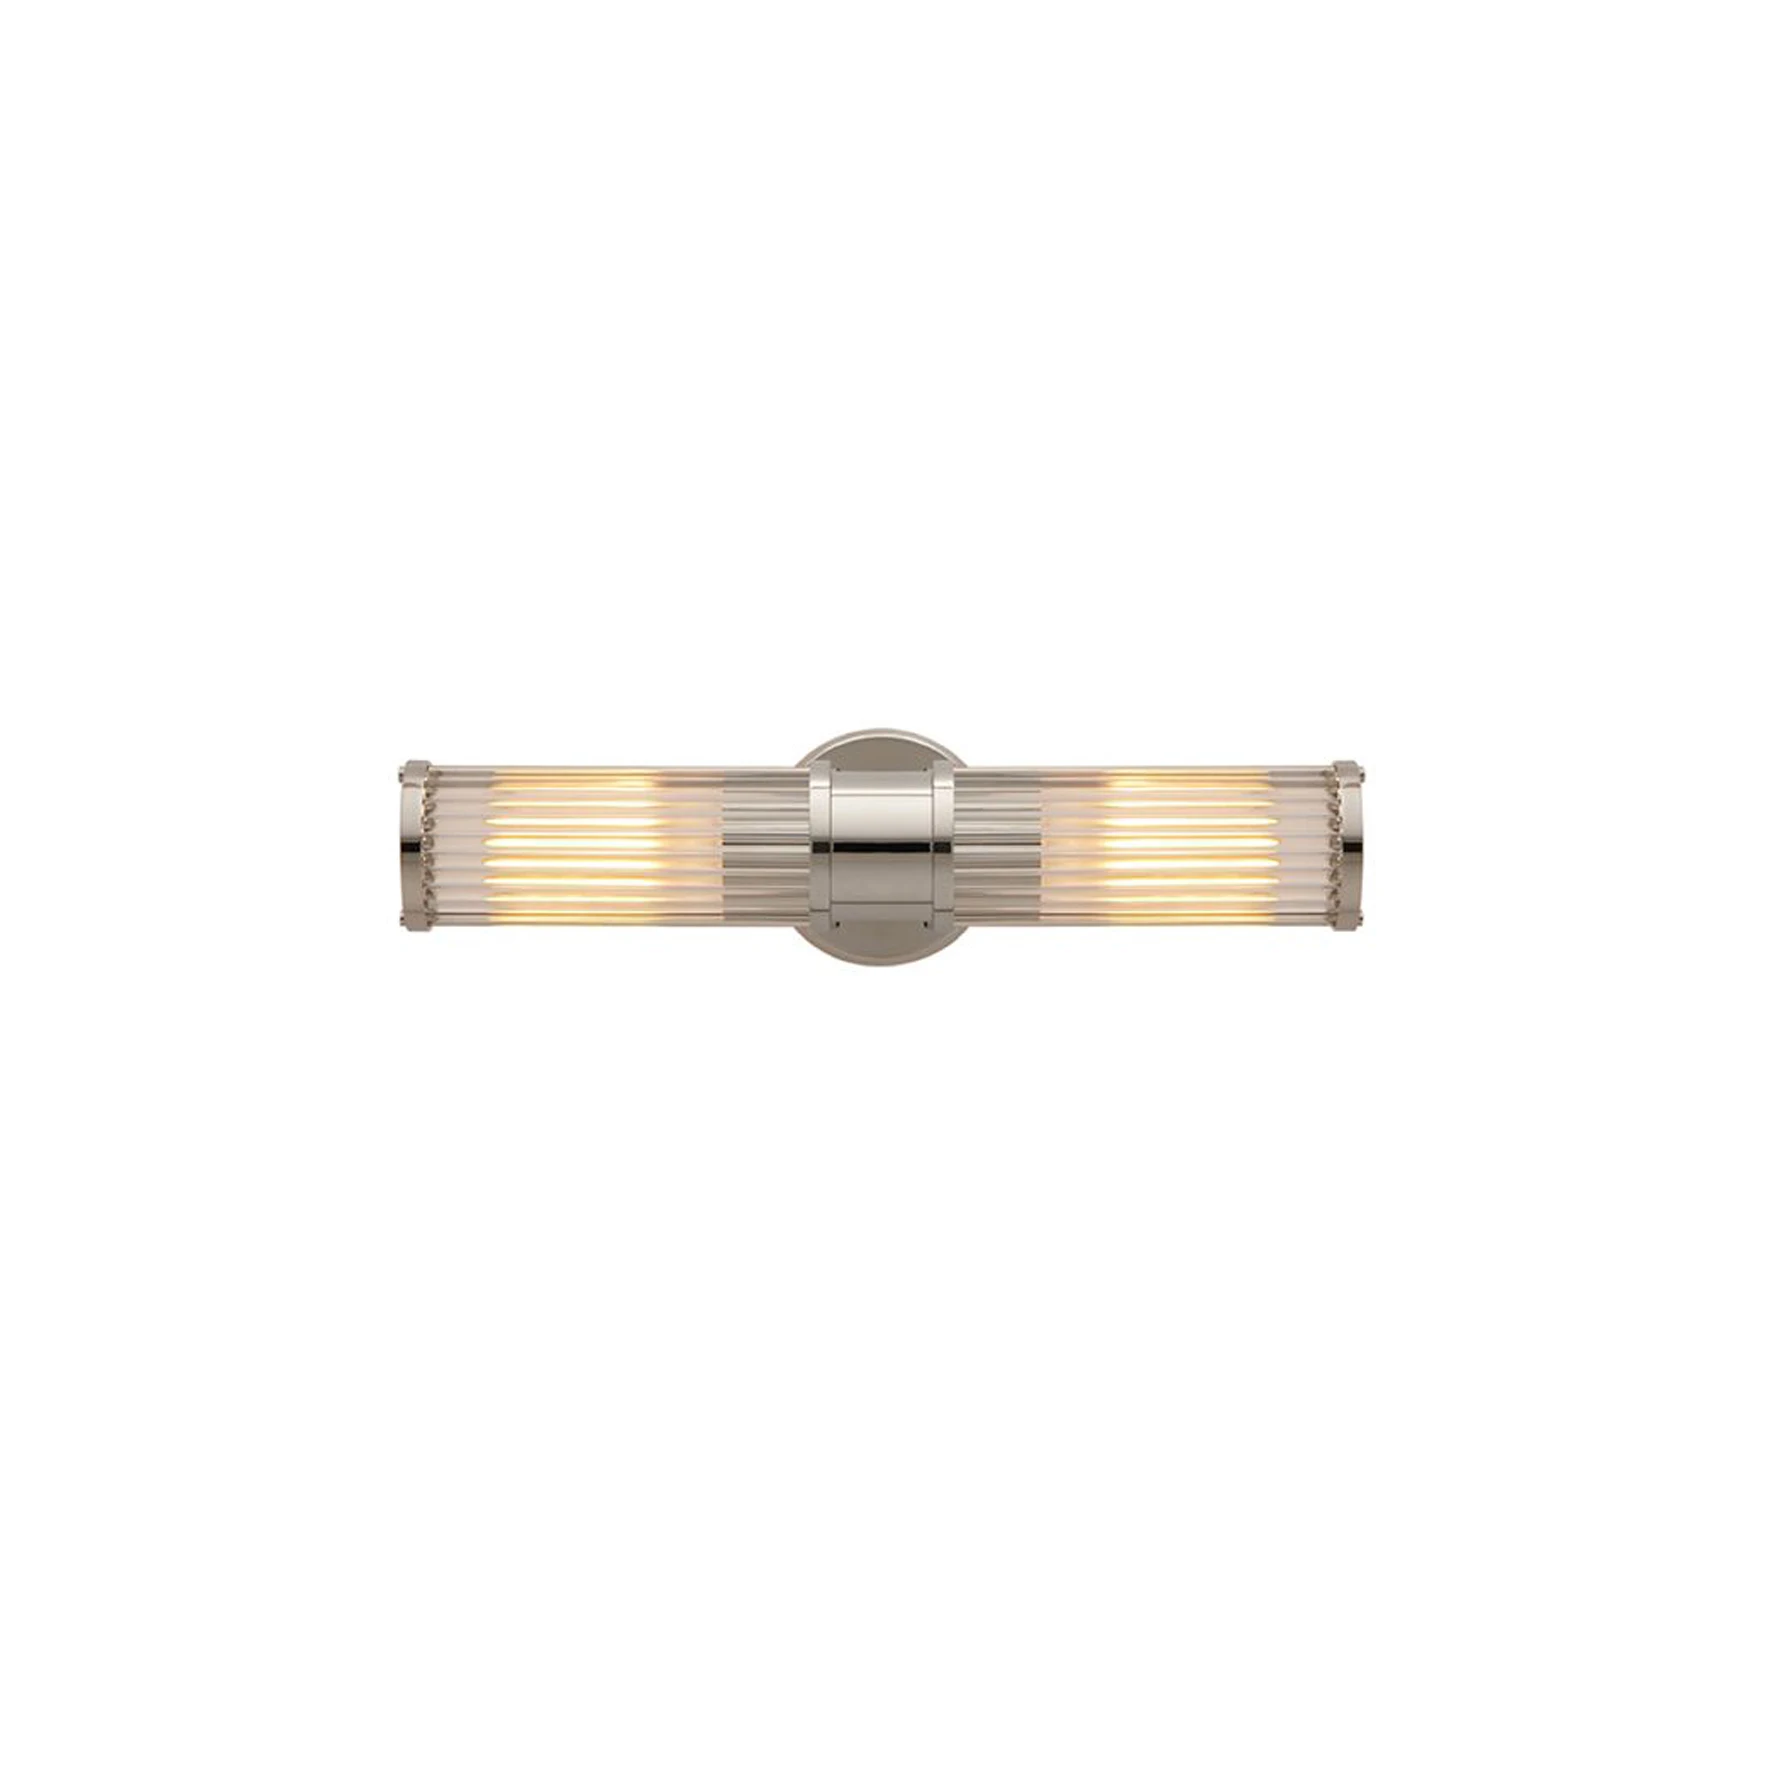 Nickel Finishing Glass Tube Internal Wall Lights for Hotel Bedroom Wall Decoration Copper Wall Sconce